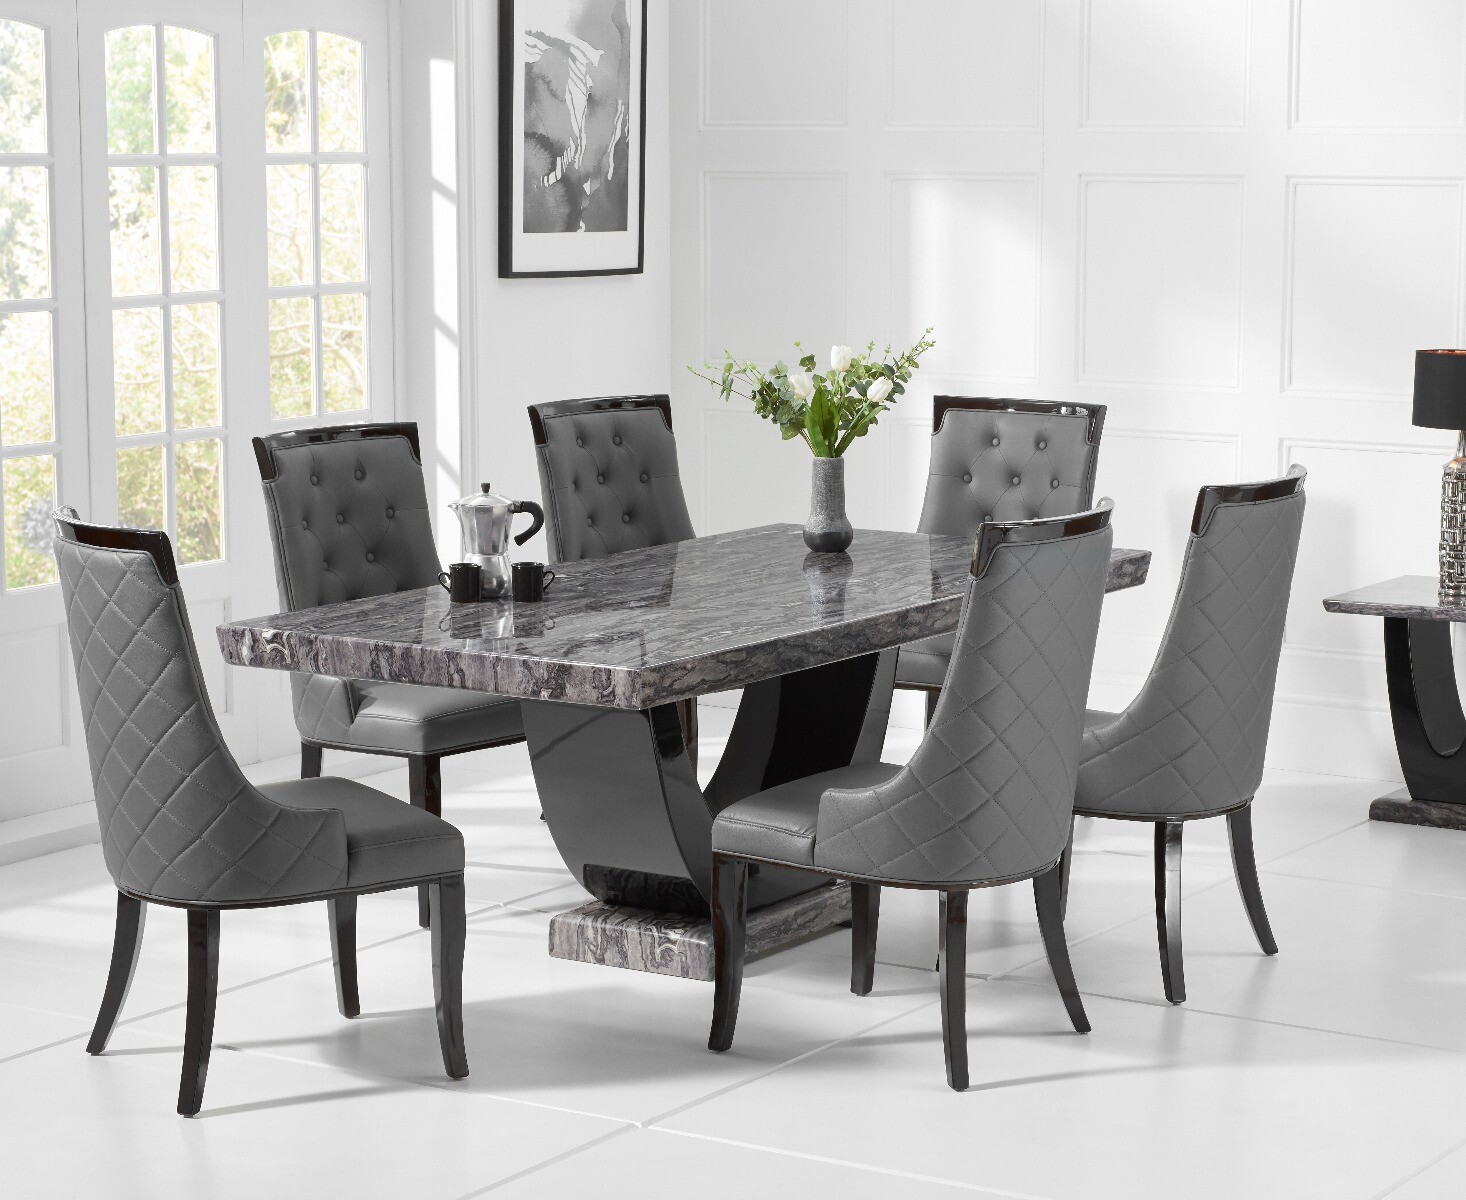 Photo 2 of Raphael 200cm dark grey pedestal marble dining table with 12 grey francesca chairs